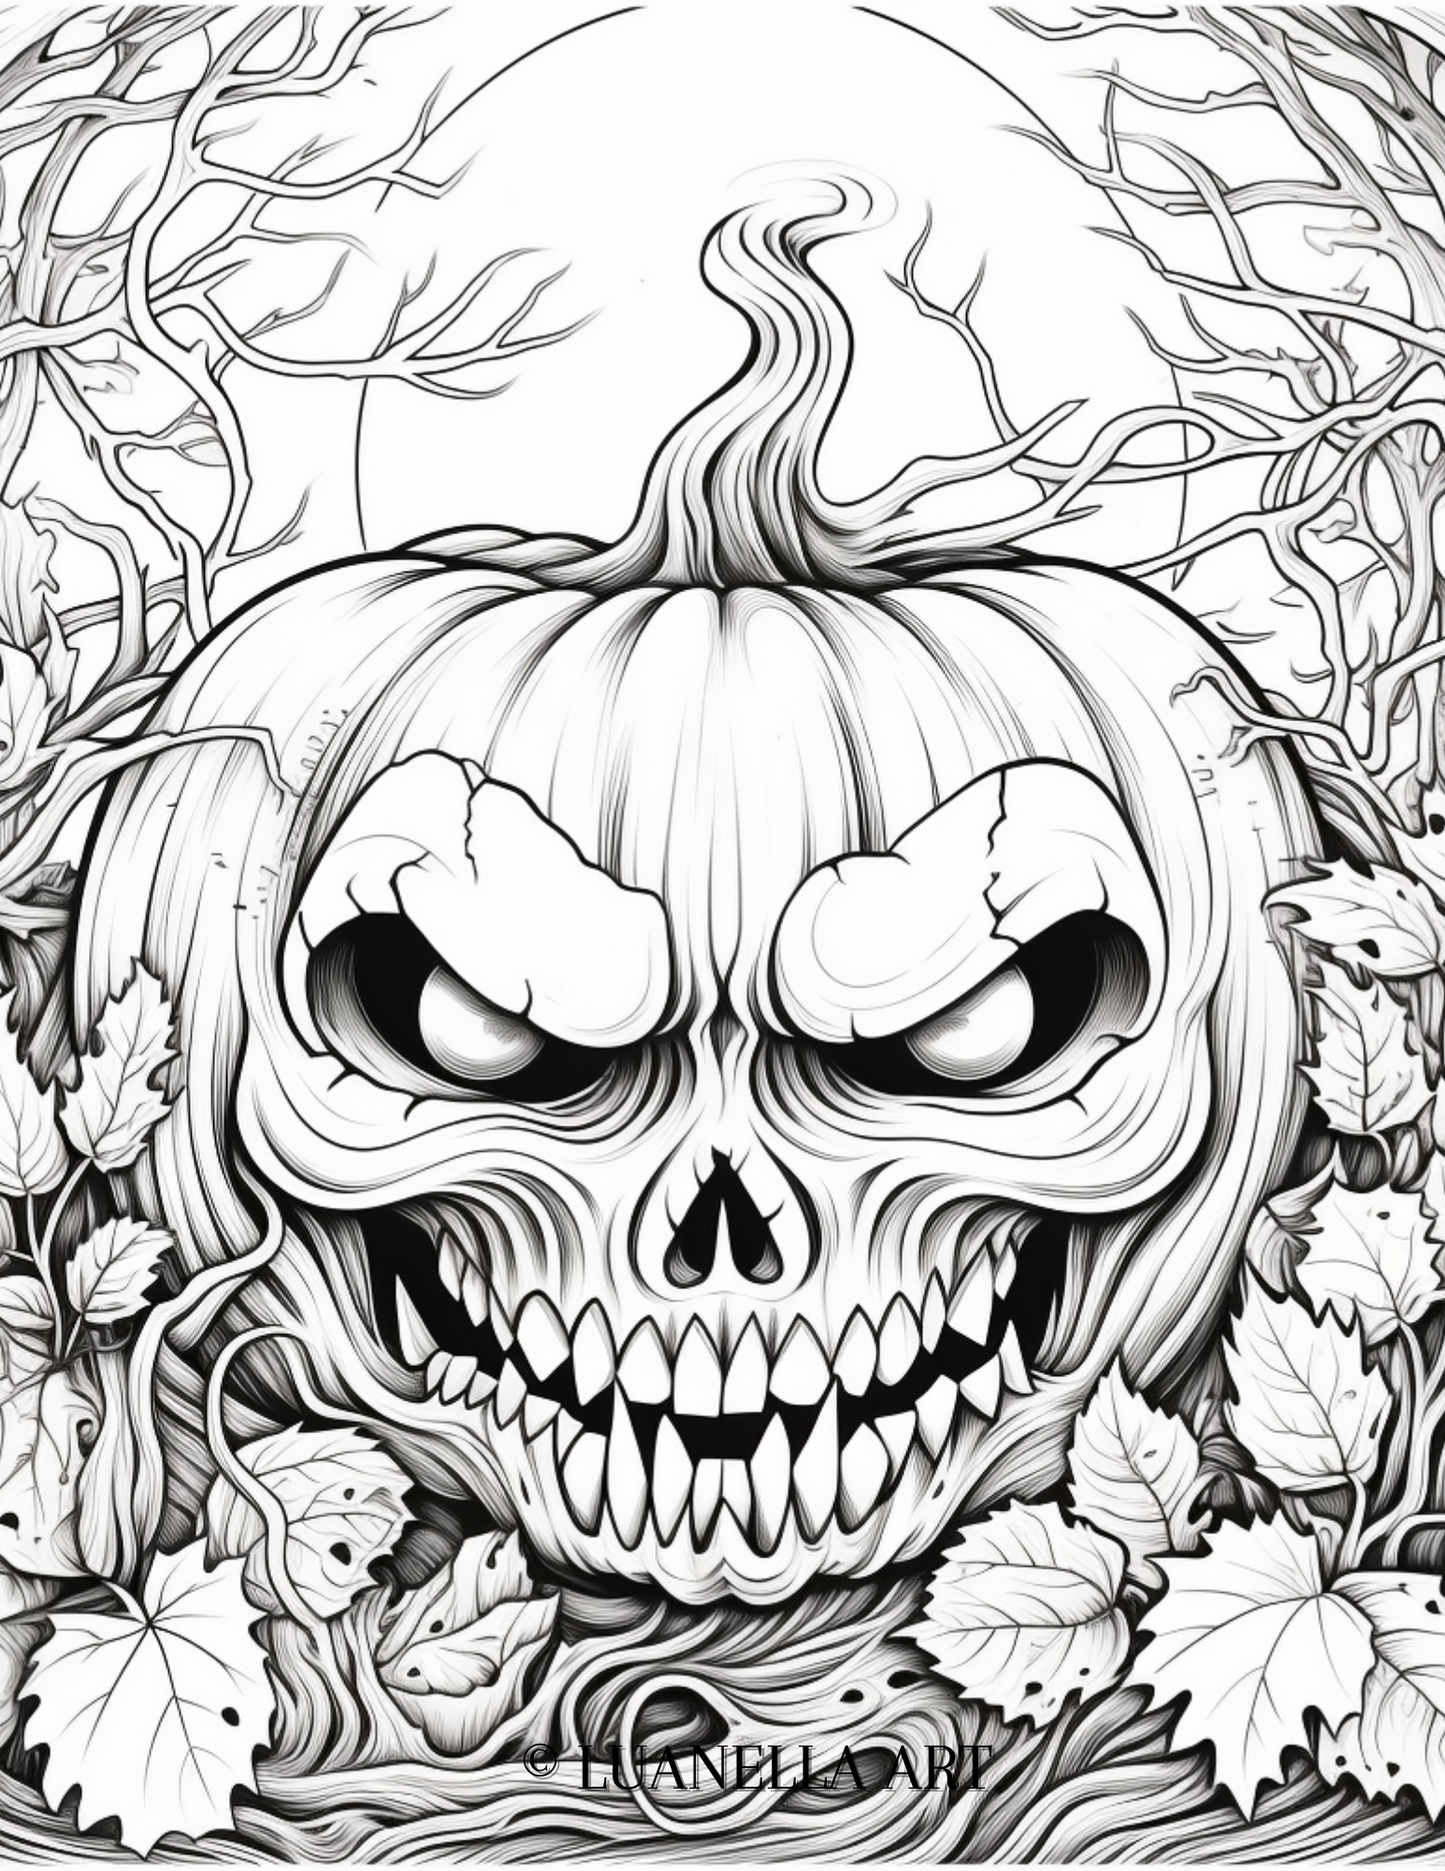 Super scary pumpkin carving | Coloring Page | Instant Digital Download